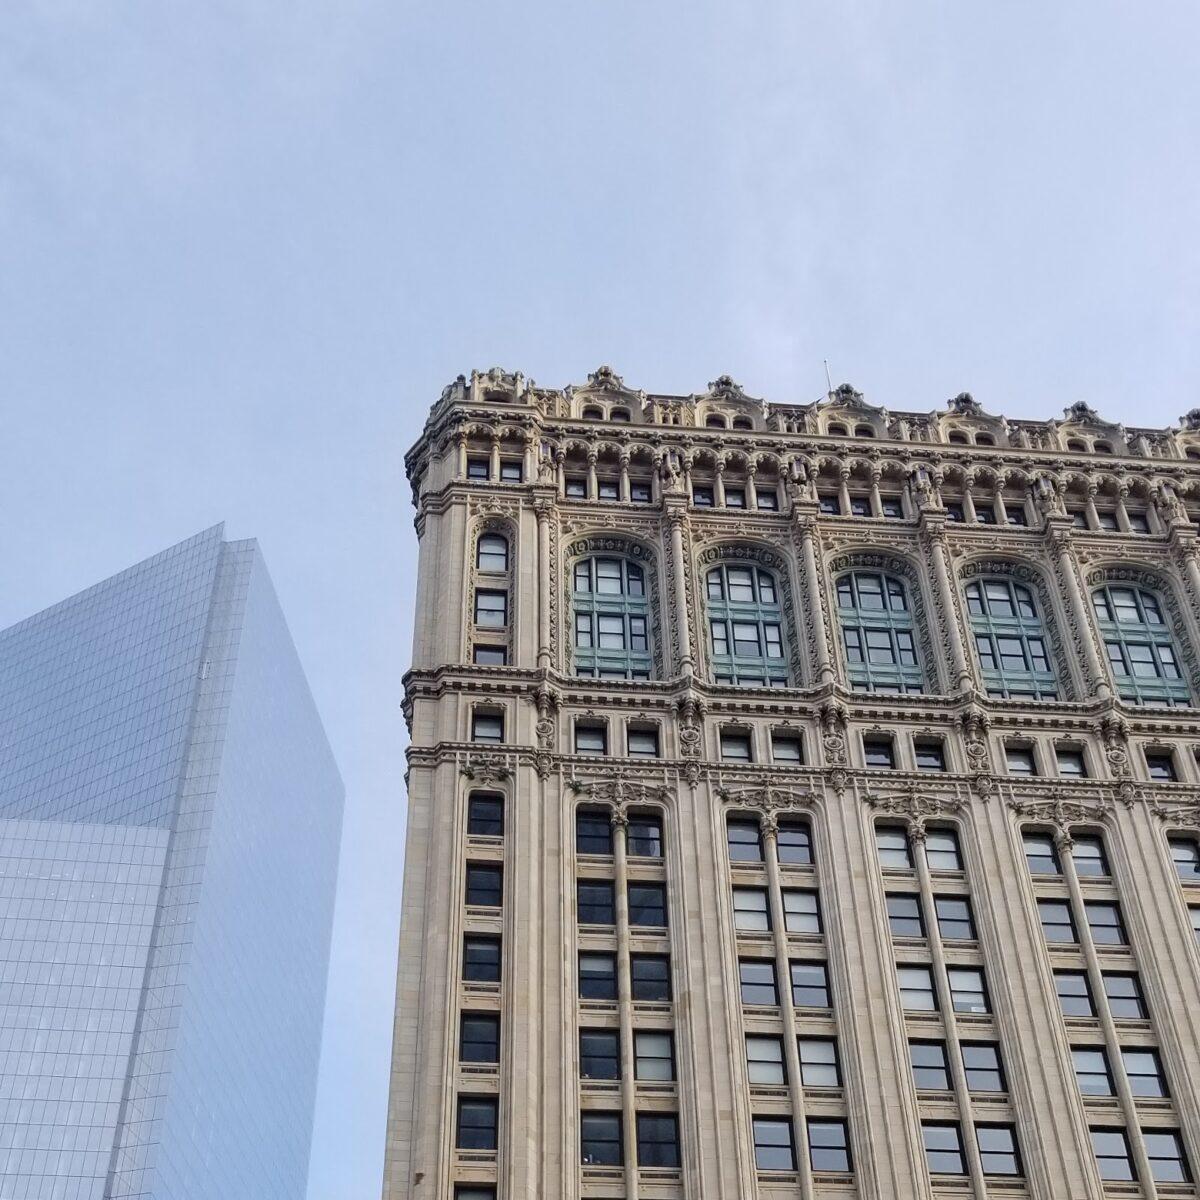 Designed by Cass Gilbert and built in 1905–1907, this building at 90 West Street was one of the first skyscrapers to consistently use neo-Gothic-style decoration. “How can two contrasting styles elevate each other to this extent?” Mastro wrote in her Instagram post. (Courtesy of Giusi Mastro)